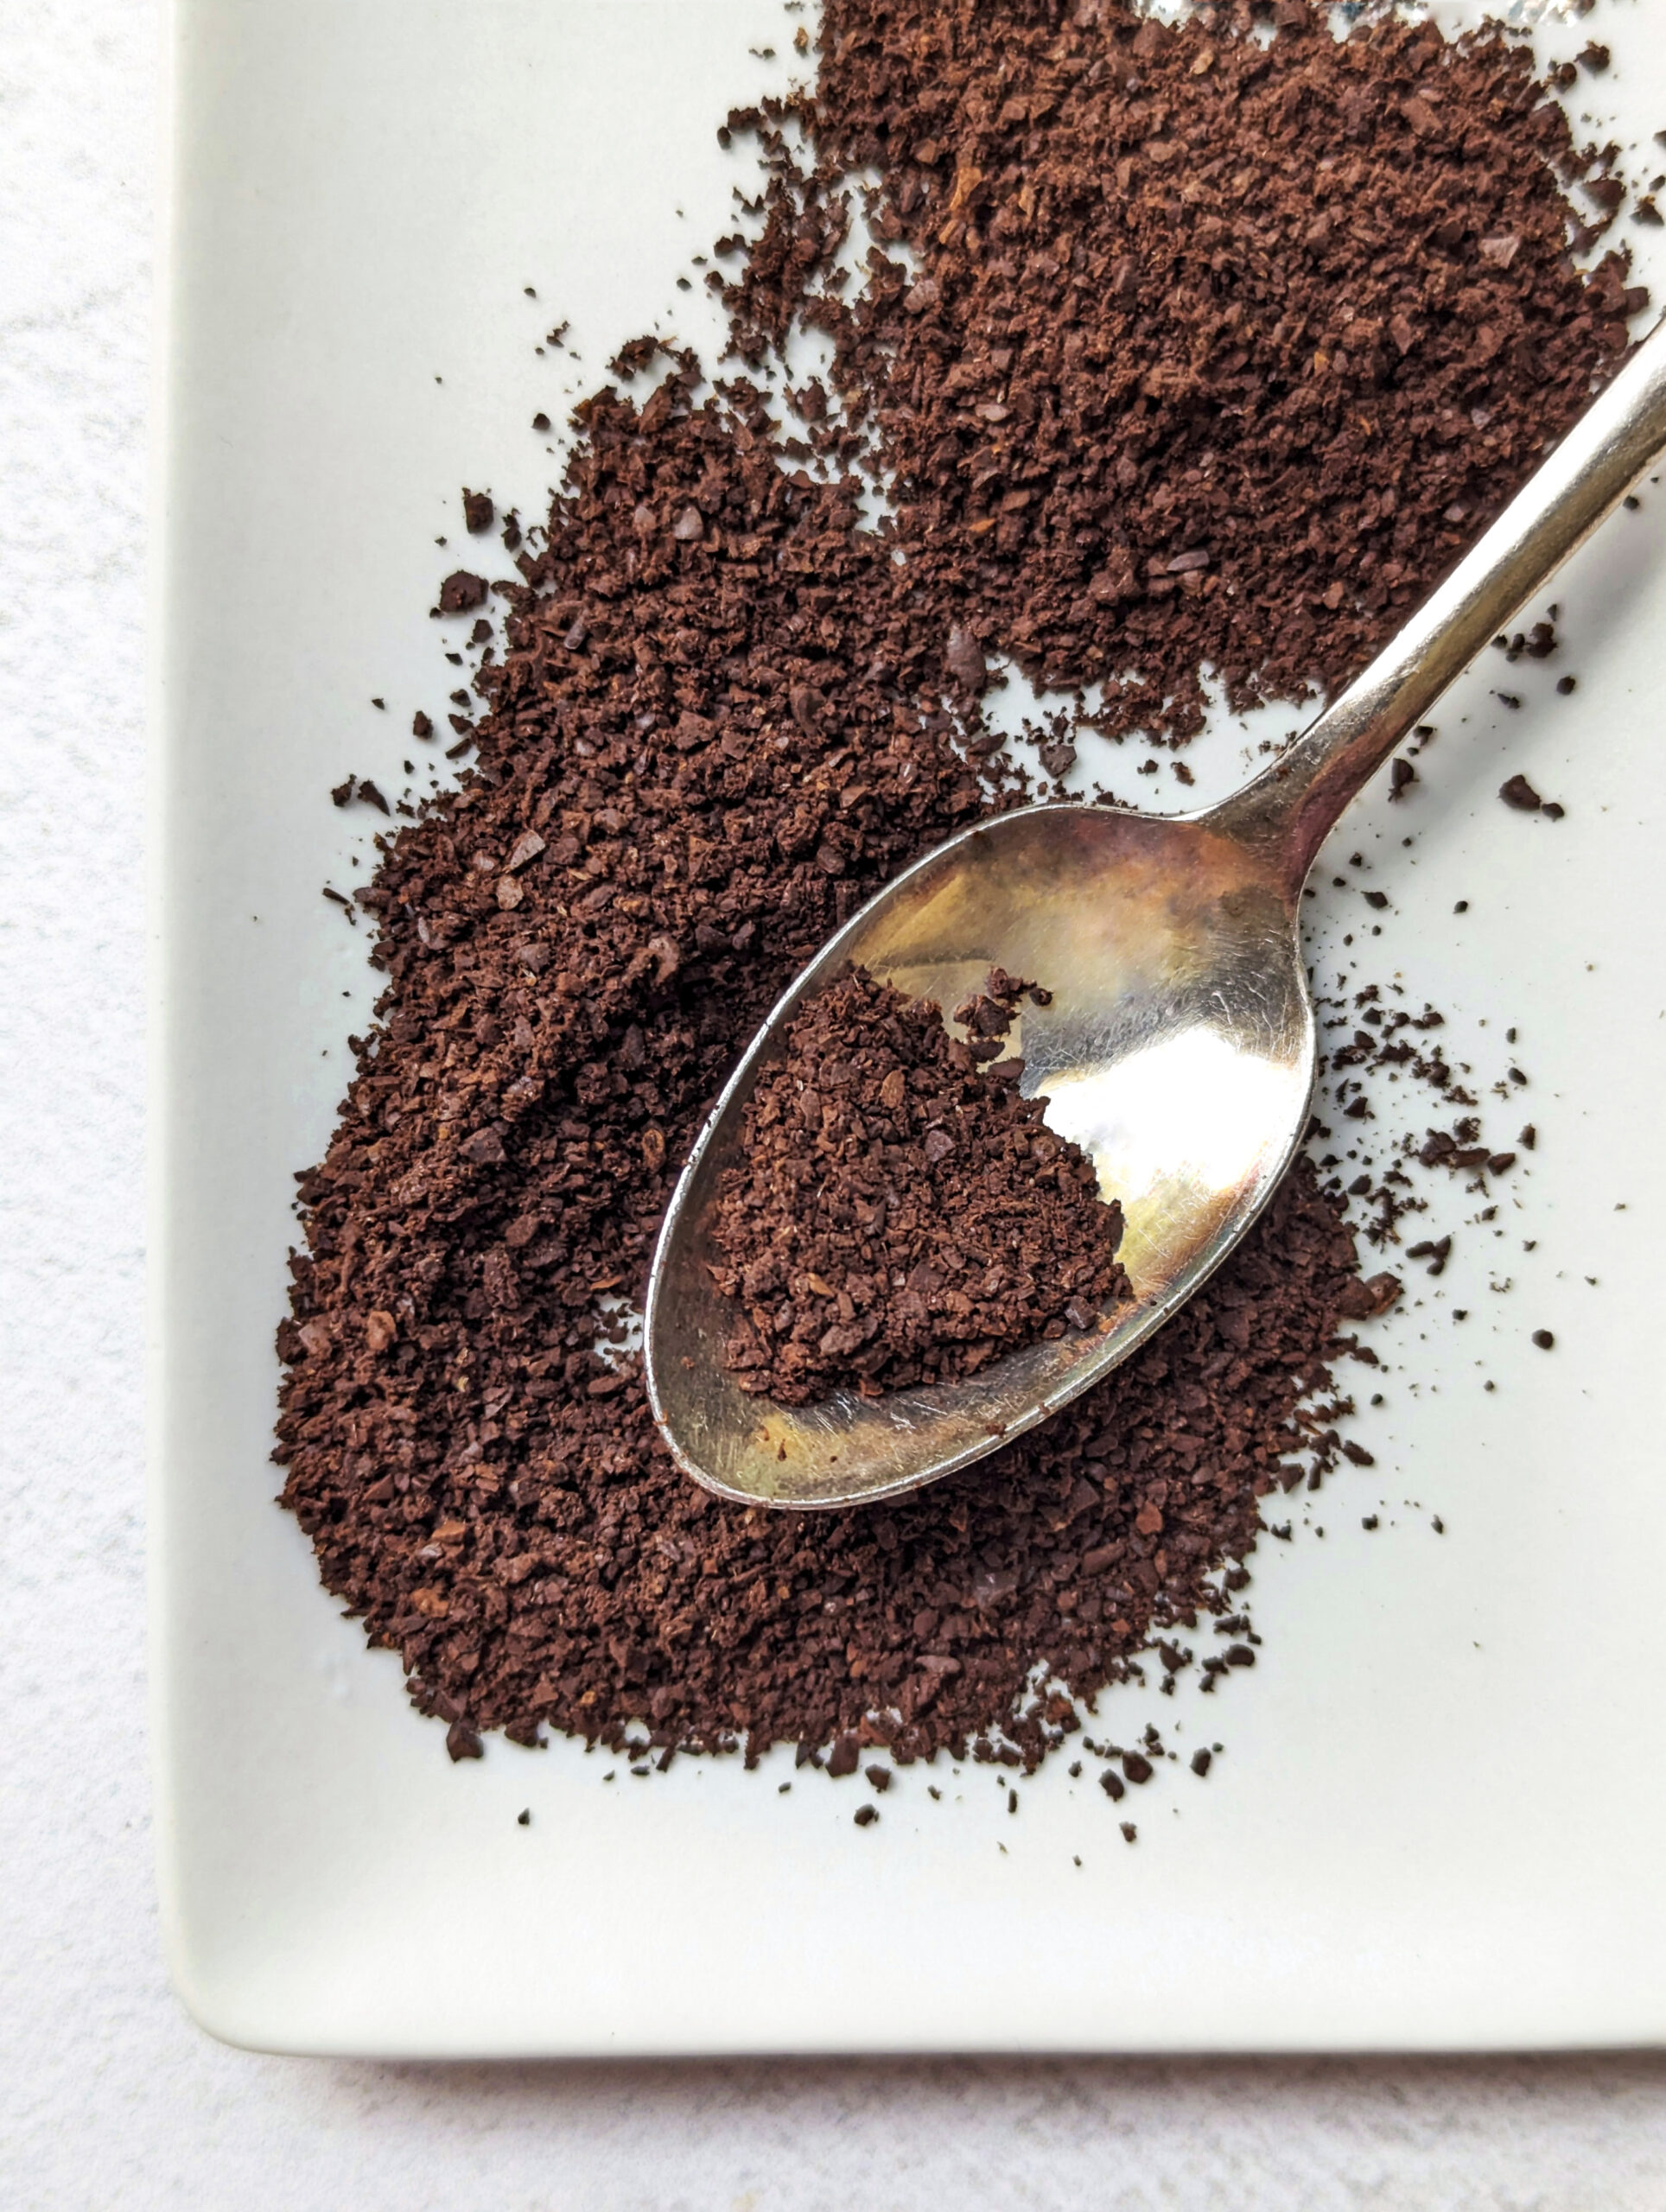 A spoon spreading out coarsely ground coffee beans on a plate.